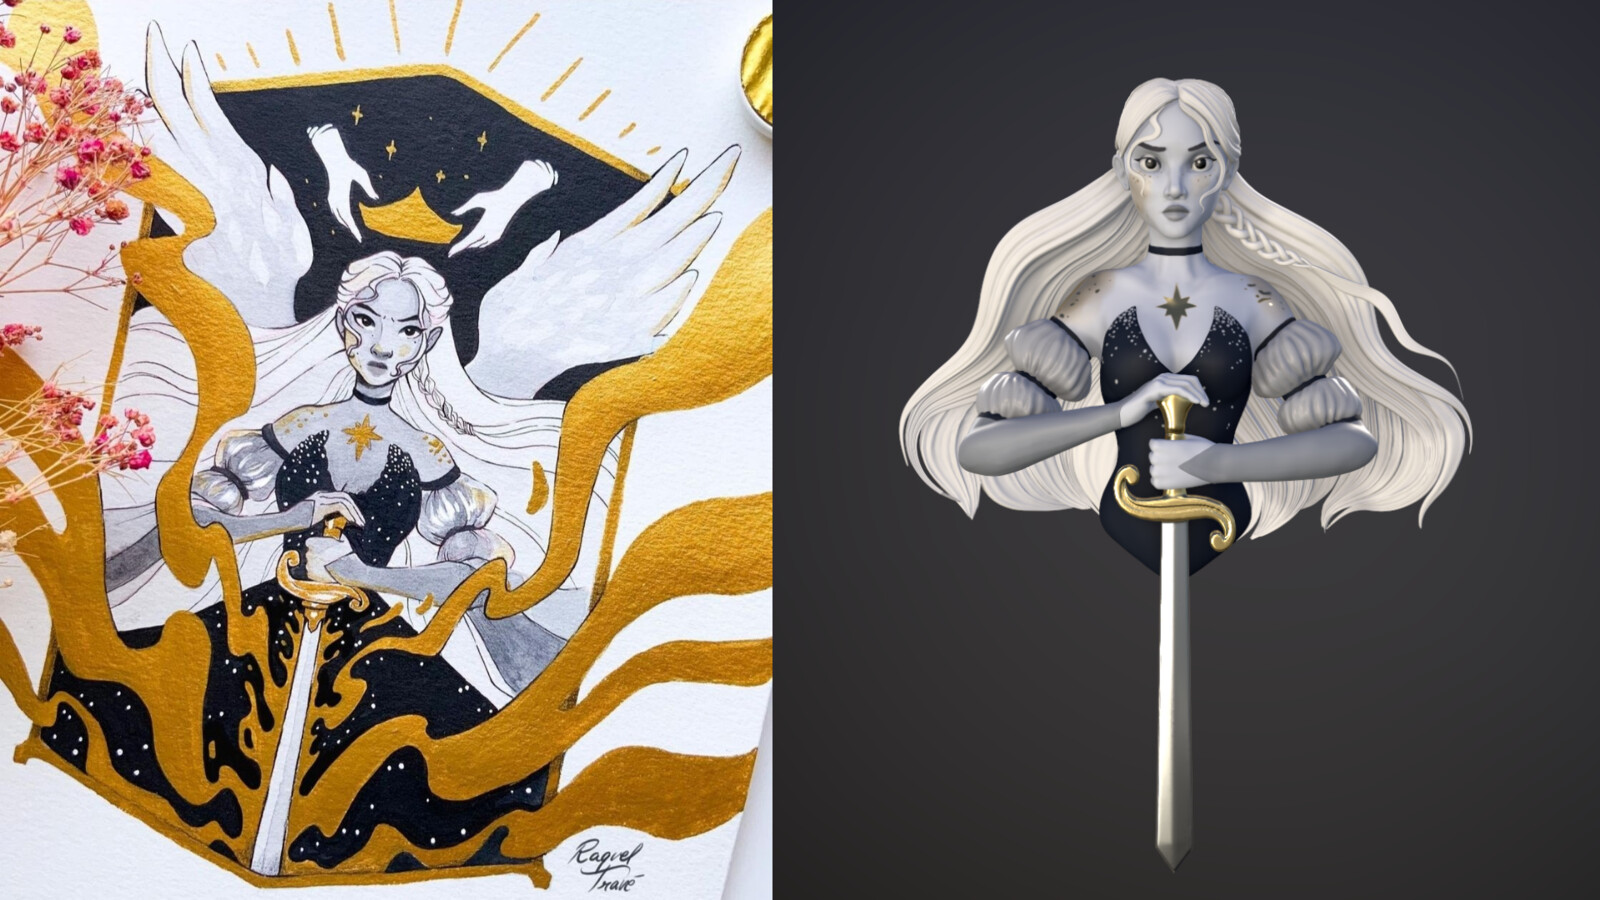 On the left, the concept by Raqueltravelillustration that I based this sculpt on. On the right, my final render.